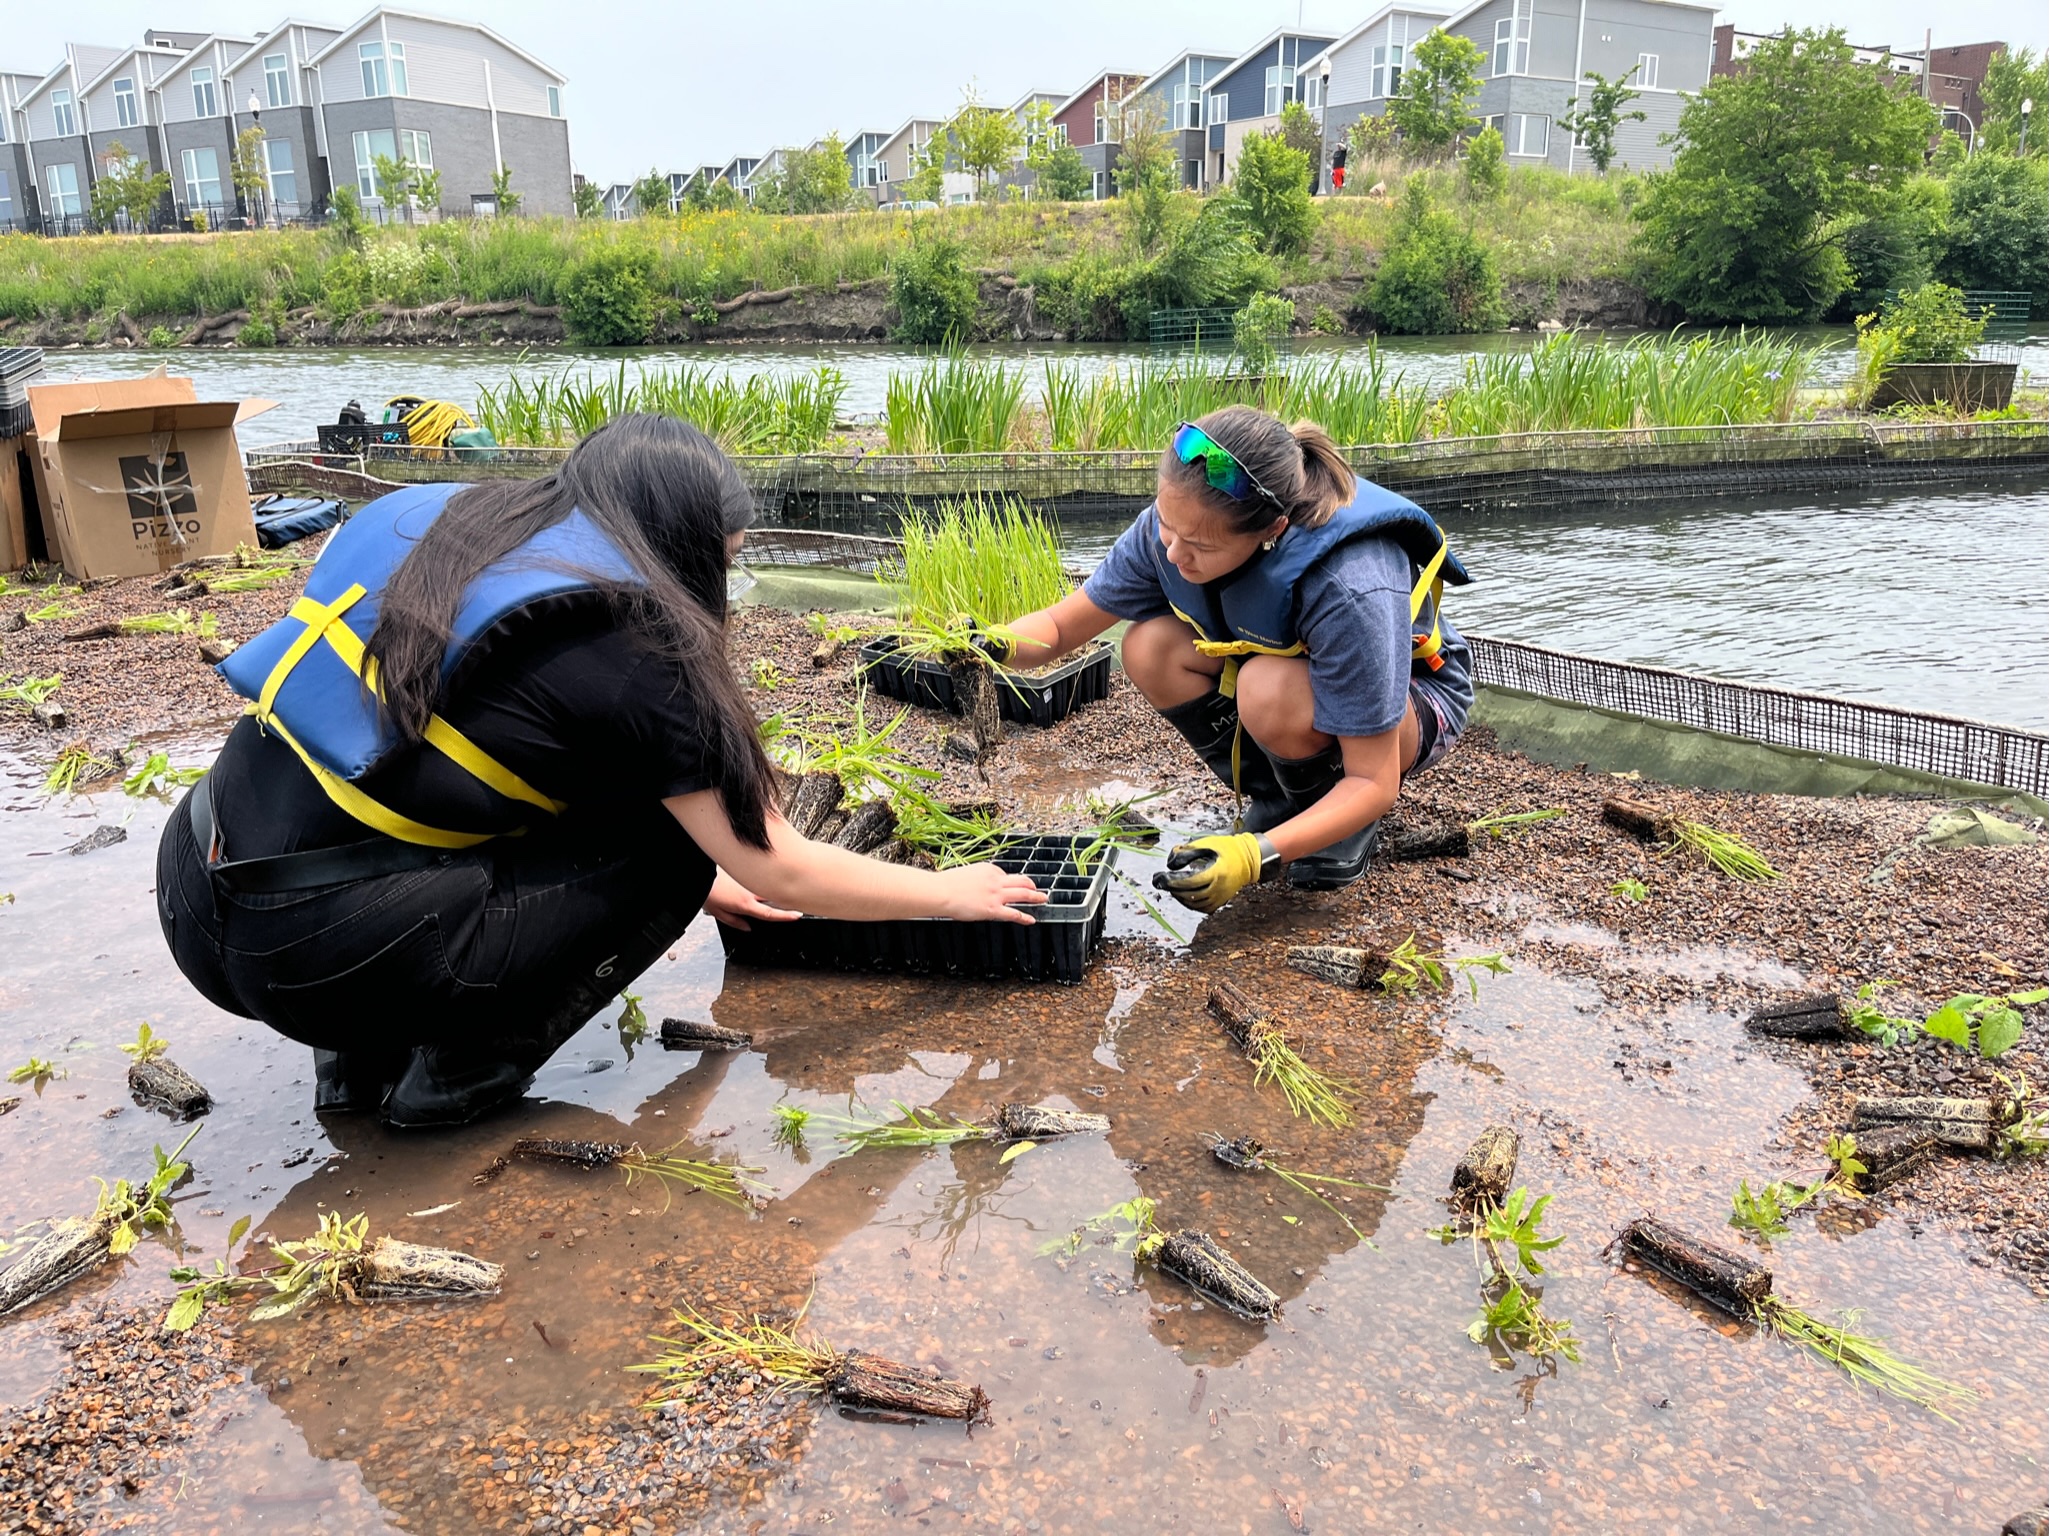 Two people crouch down, working with plant seedlings along a river. Rows of townhouses can be seen across the water.